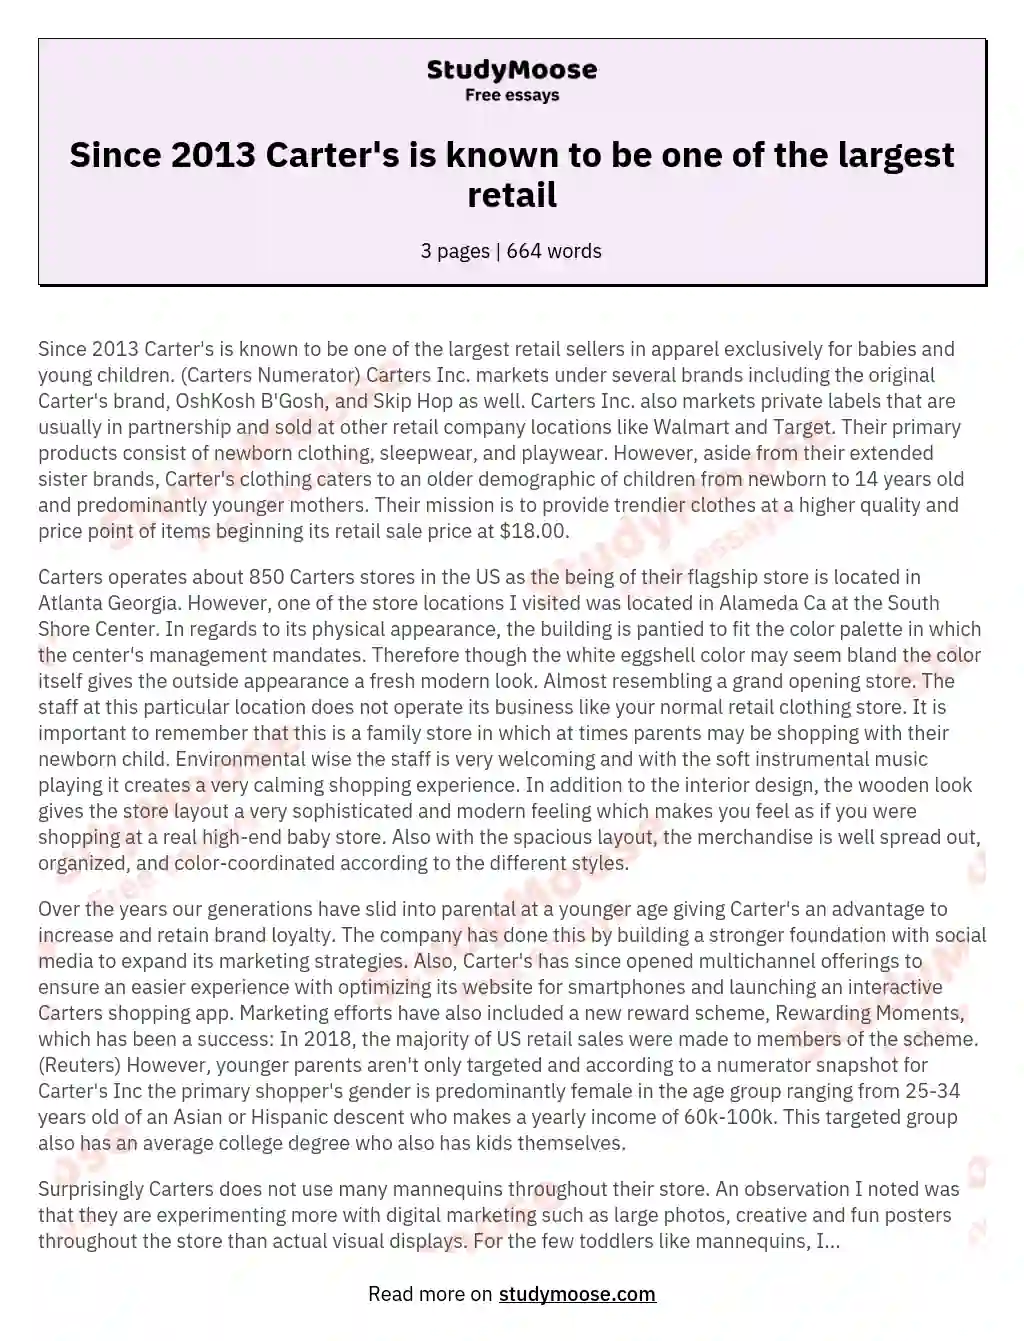 Since 2013 Carter's is known to be one of the largest retail